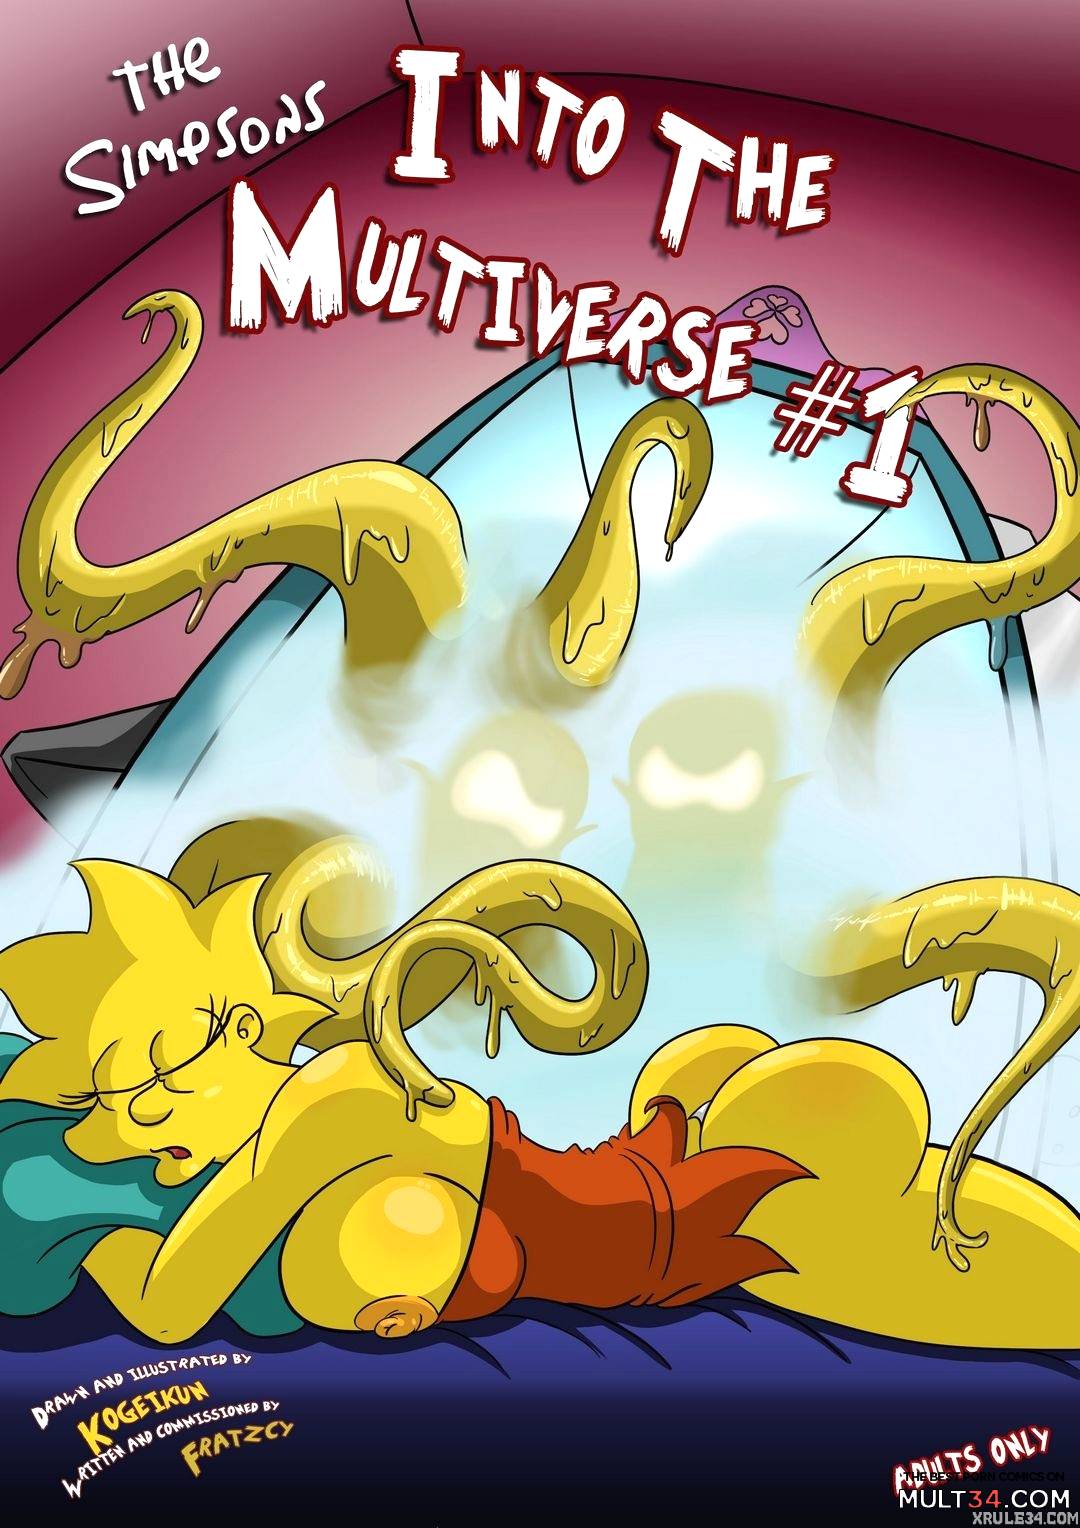 The Simpsons Into the Multiverse page 1